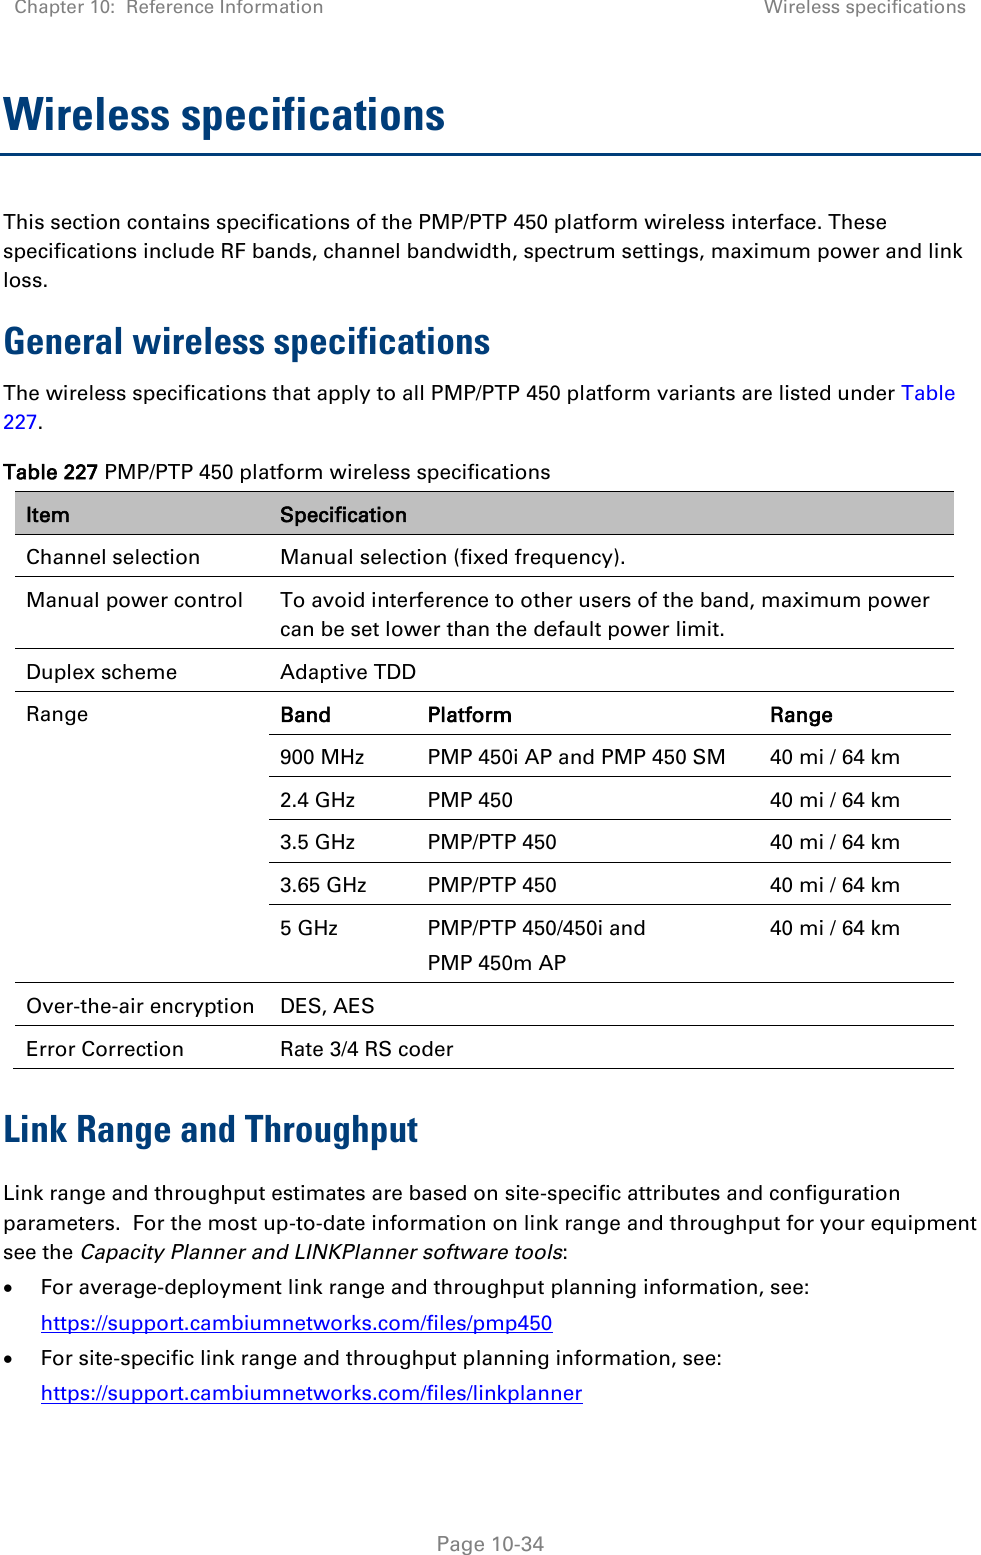 Chapter 10:  Reference Information Wireless specifications   Page 10-34 Wireless specifications This section contains specifications of the PMP/PTP 450 platform wireless interface. These specifications include RF bands, channel bandwidth, spectrum settings, maximum power and link loss. General wireless specifications The wireless specifications that apply to all PMP/PTP 450 platform variants are listed under Table 227. Table 227 PMP/PTP 450 platform wireless specifications Item Specification Channel selection Manual selection (fixed frequency). Manual power control  To avoid interference to other users of the band, maximum power can be set lower than the default power limit. Duplex scheme Adaptive TDD Range Band Platform Range 900 MHz  PMP 450i AP and PMP 450 SM 40 mi / 64 km 2.4 GHz  PMP 450 40 mi / 64 km 3.5 GHz  PMP/PTP 450 40 mi / 64 km 3.65 GHz  PMP/PTP 450 40 mi / 64 km 5 GHz  PMP/PTP 450/450i and PMP 450m AP 40 mi / 64 km Over-the-air encryption DES, AES Error Correction Rate 3/4 RS coder Link Range and Throughput Link range and throughput estimates are based on site-specific attributes and configuration parameters.  For the most up-to-date information on link range and throughput for your equipment see the Capacity Planner and LINKPlanner software tools:  For average-deployment link range and throughput planning information, see: https://support.cambiumnetworks.com/files/pmp450  For site-specific link range and throughput planning information, see: https://support.cambiumnetworks.com/files/linkplanner 